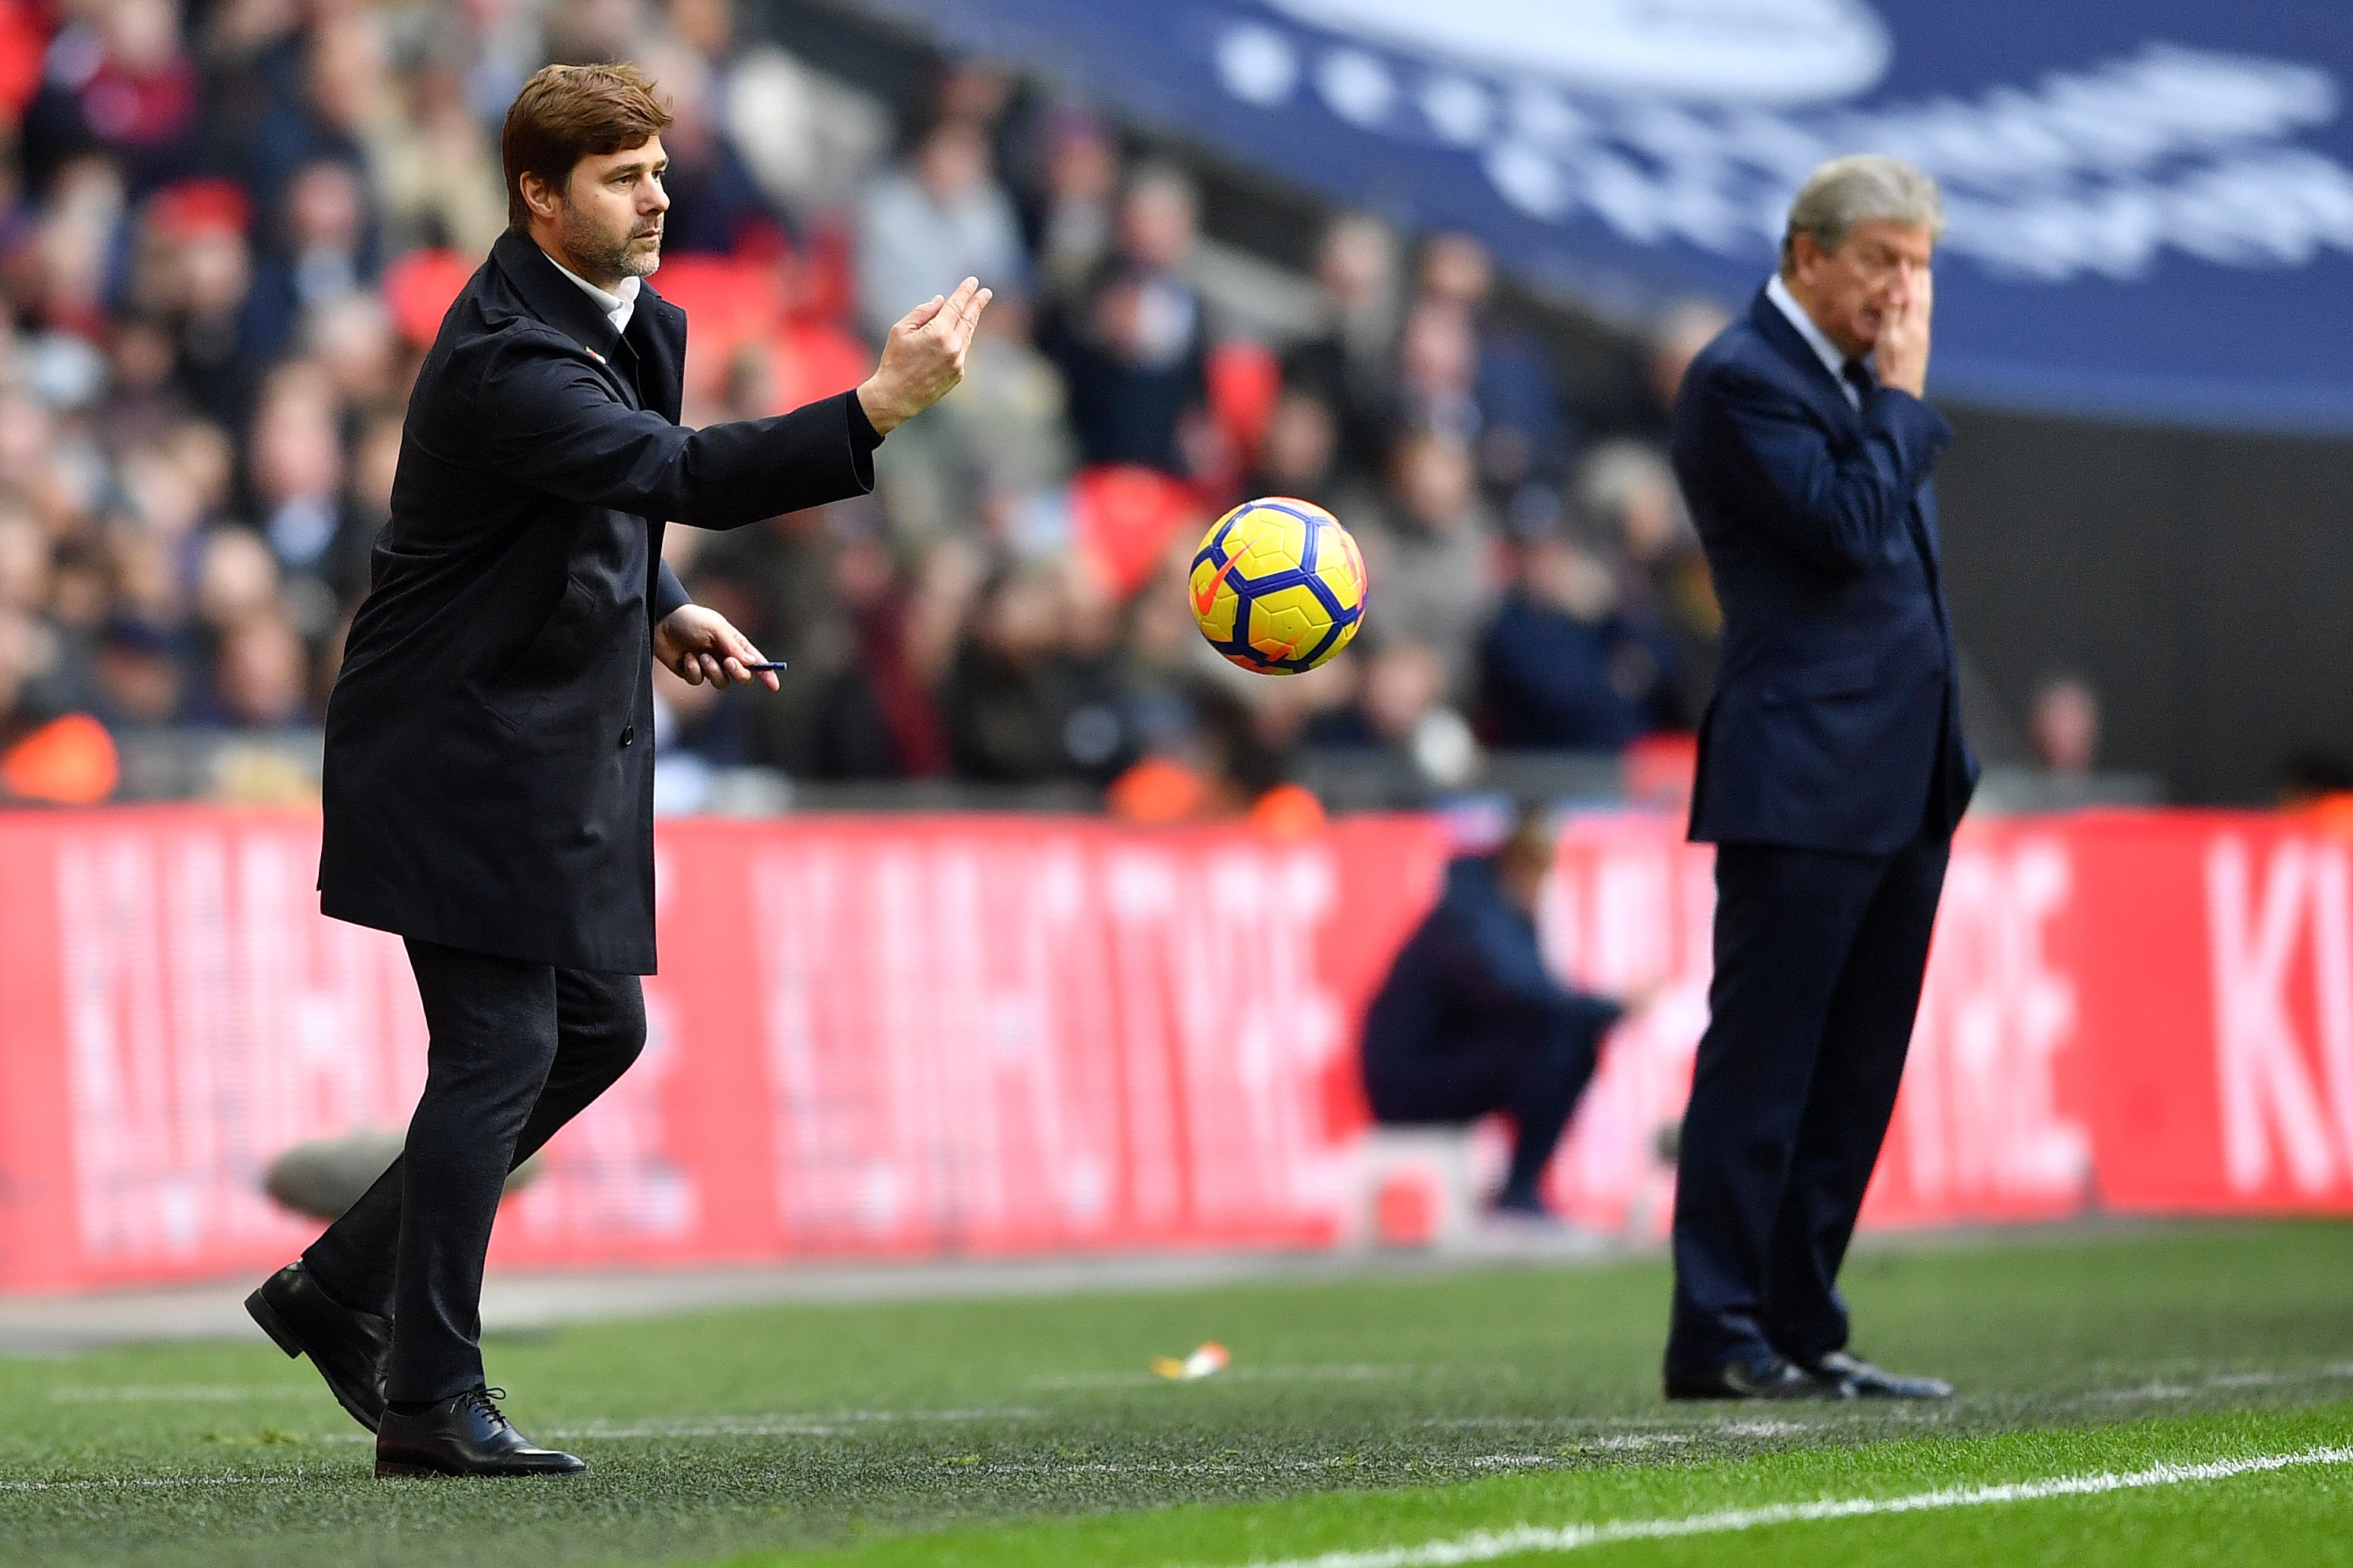 Tottenham Hotspur's Argentinian head coach Mauricio Pochettino (L) throws the ball back in to play as Crystal Palace's English manager Roy Hodgson reacts during the English Premier League football match between Tottenham Hotspur and Crystal Palace at Wembley Stadium in London, on November 5, 2017. / AFP PHOTO / Ben STANSALL / RESTRICTED TO EDITORIAL USE. No use with unauthorized audio, video, data, fixture lists, club/league logos or 'live' services. Online in-match use limited to 75 images, no video emulation. No use in betting, games or single club/league/player publications.  /         (Photo credit should read BEN STANSALL/AFP/Getty Images)